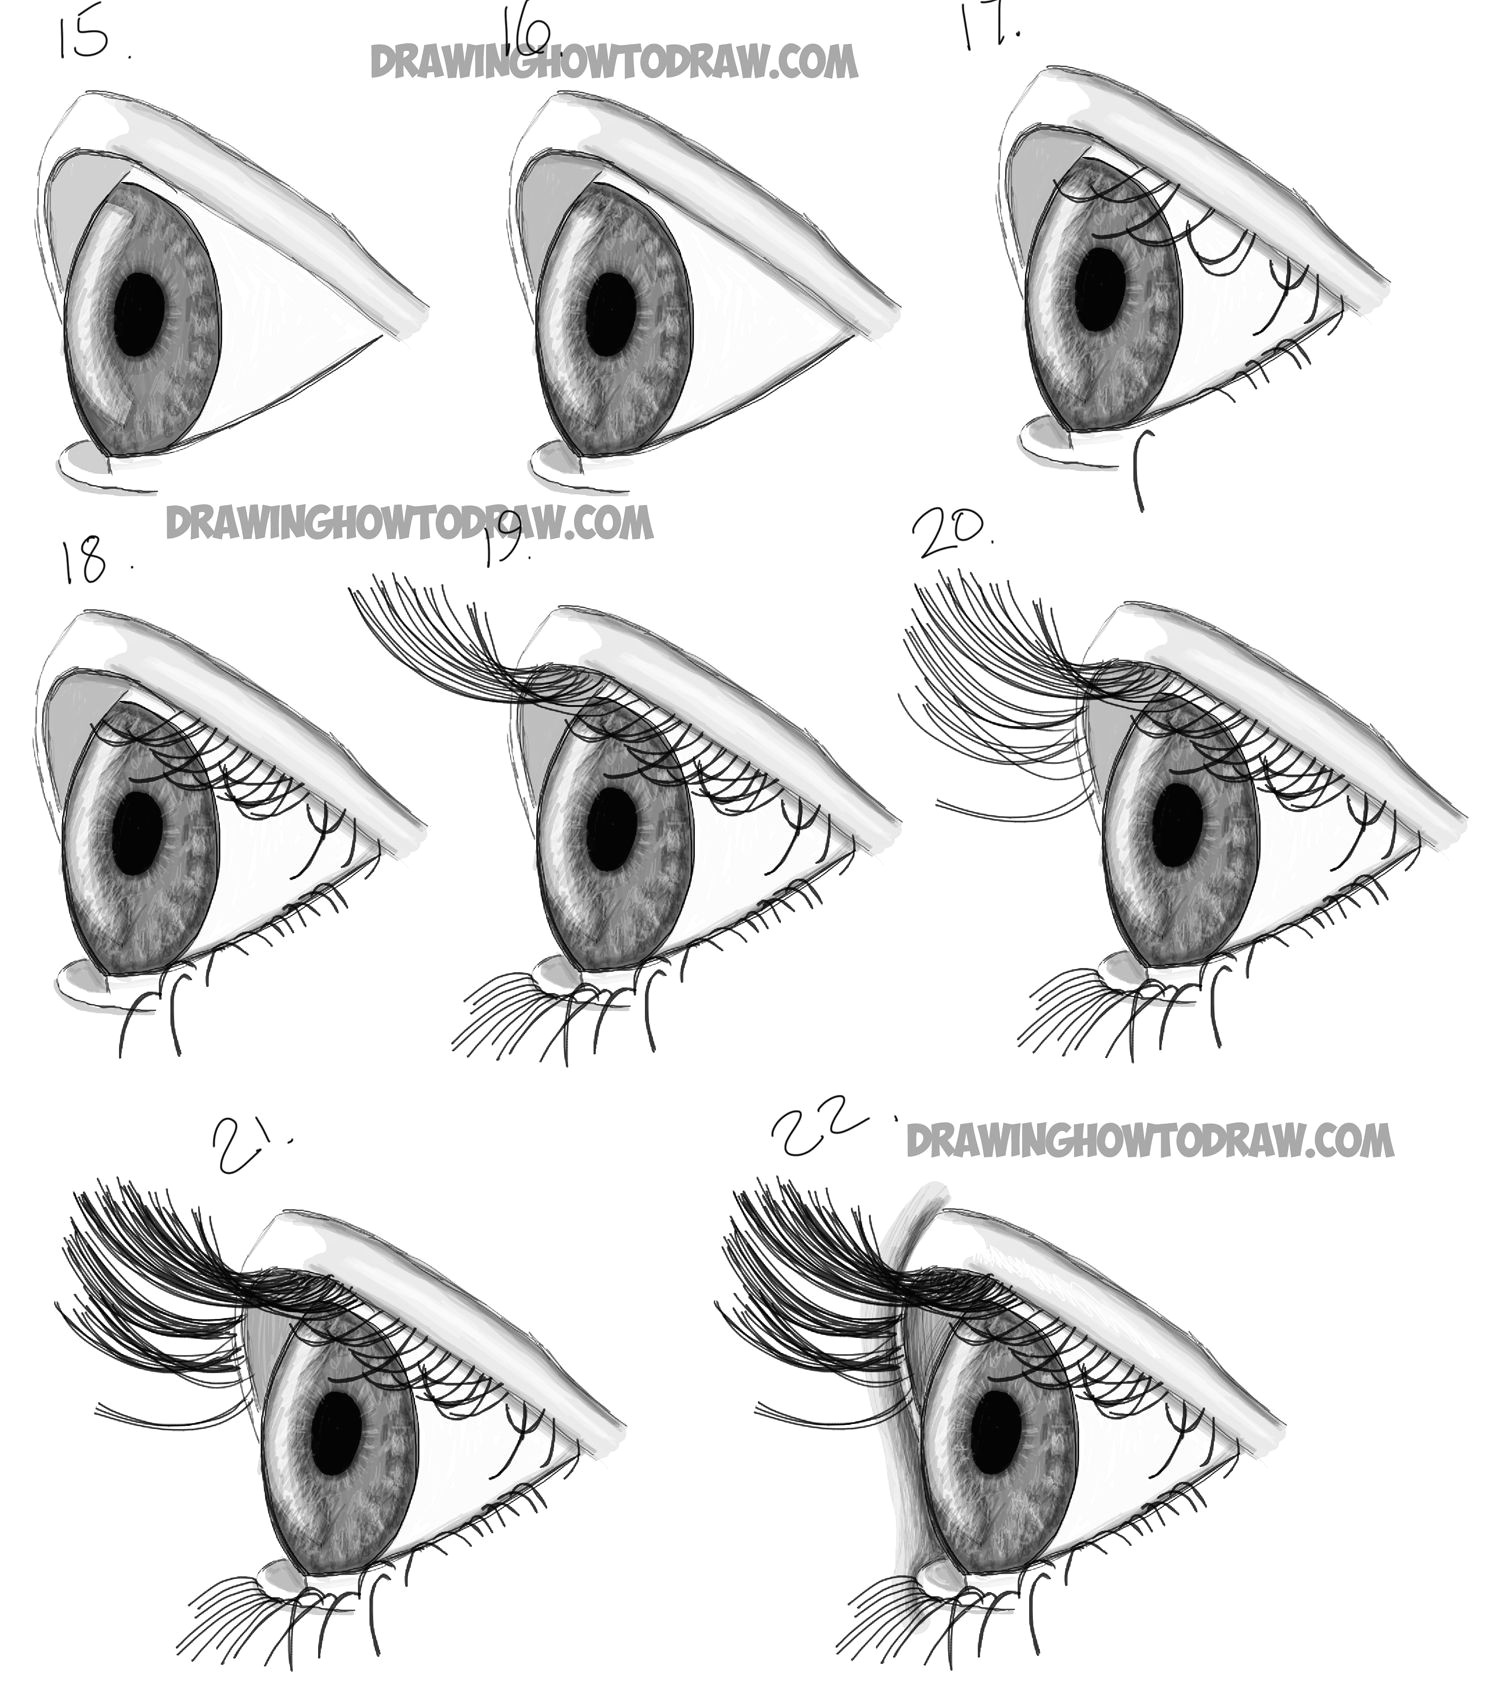 Tips for Drawing An Eye How to Draw Realistic Eyes From the Side Profile View Step by Step